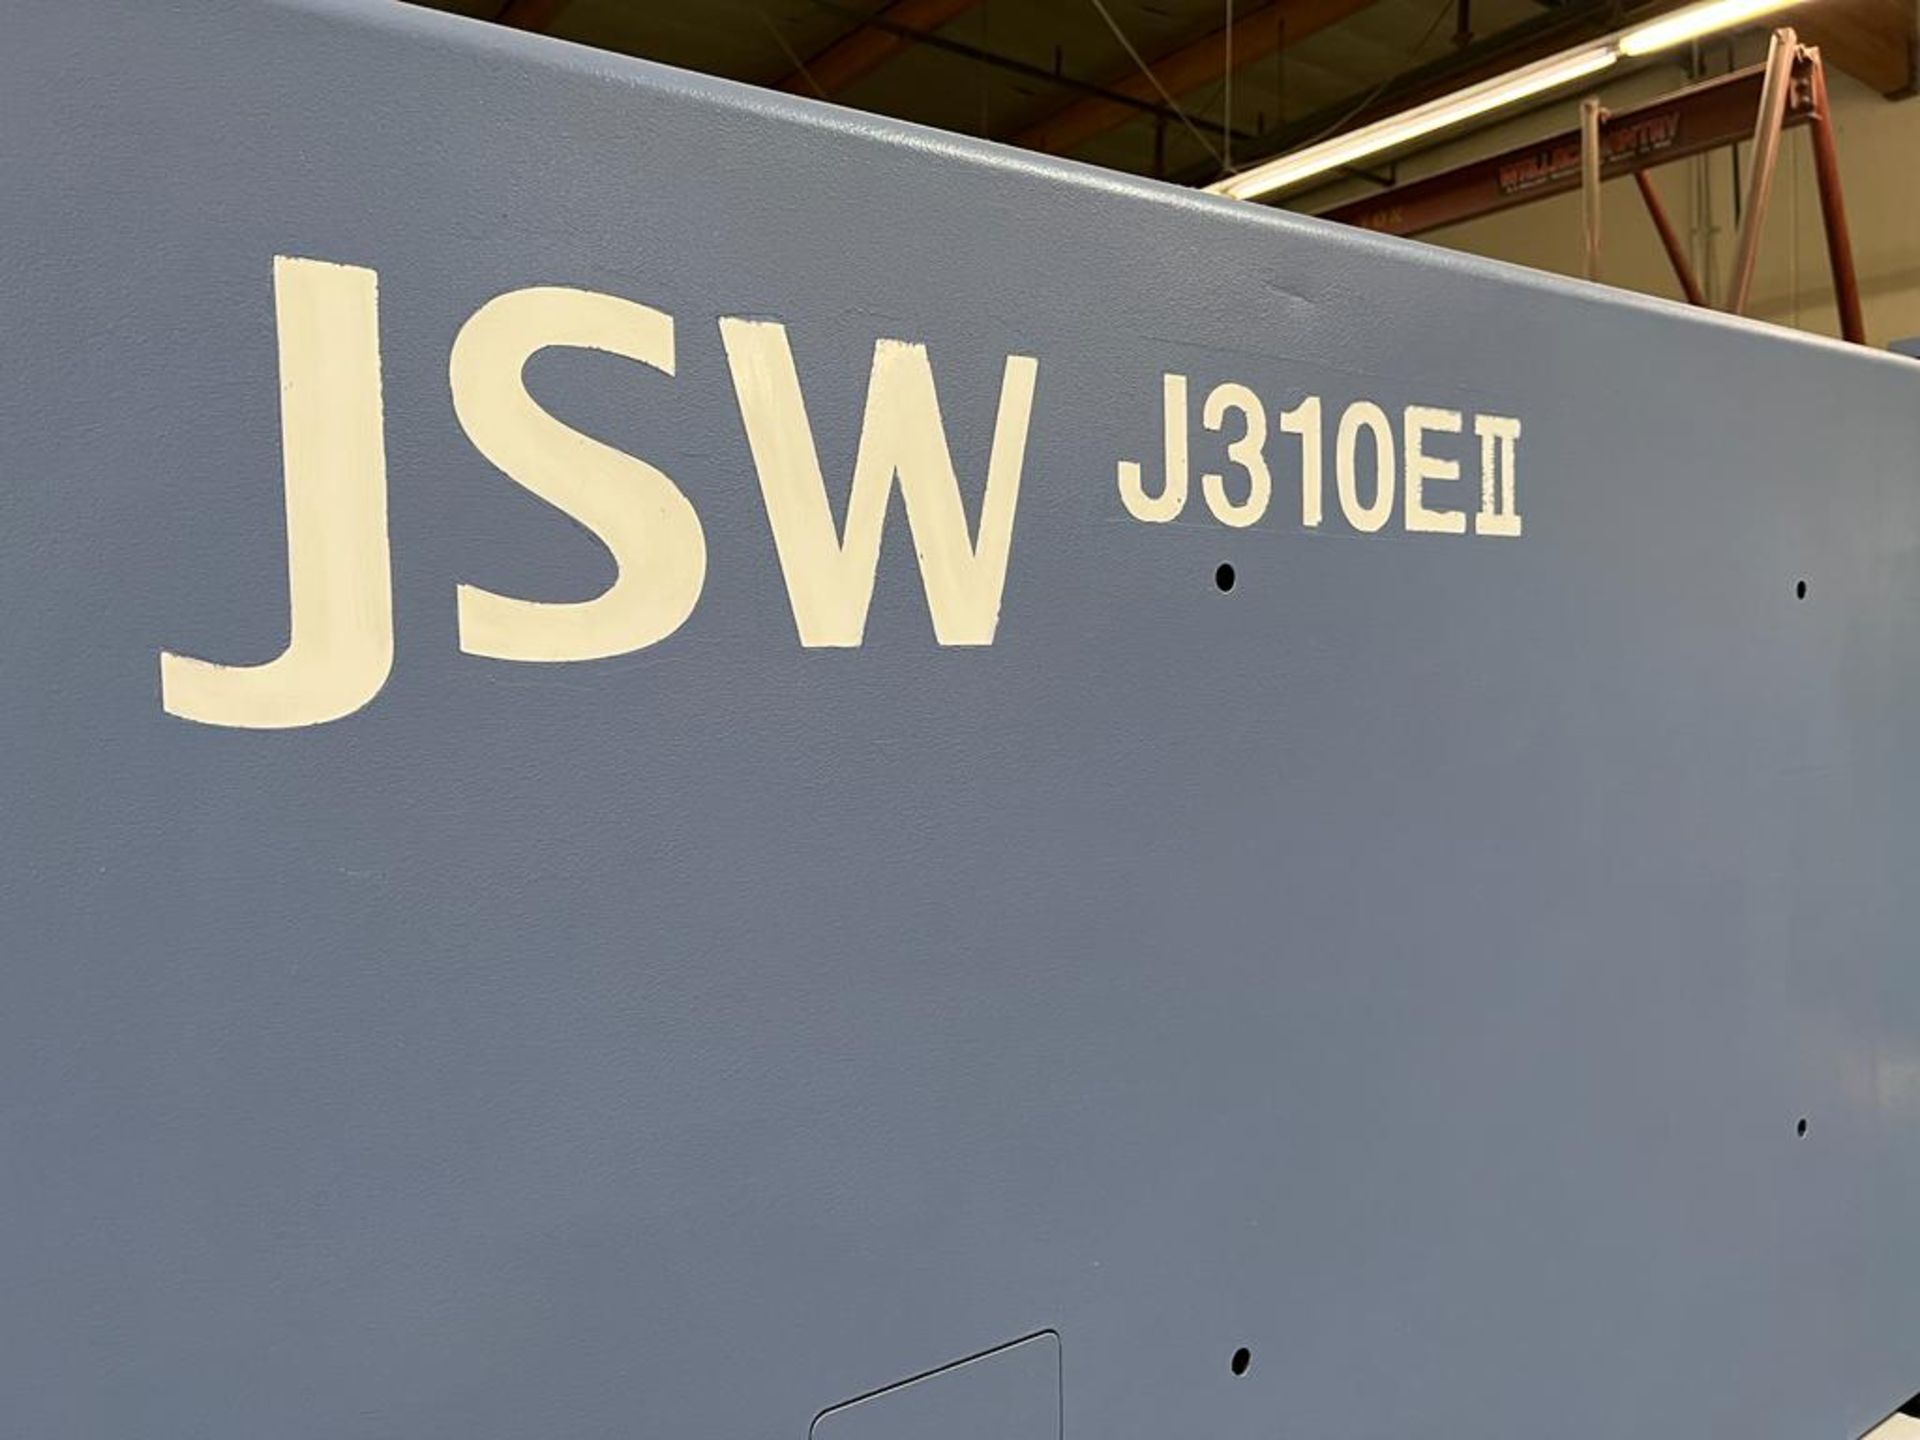 JSW MODEL 310E II, 310 TON PLASTIC INJECTION MOLDING MACHINE, 22.44’’, 64.69 Shot Size. SOLD AS-IS - Image 9 of 9